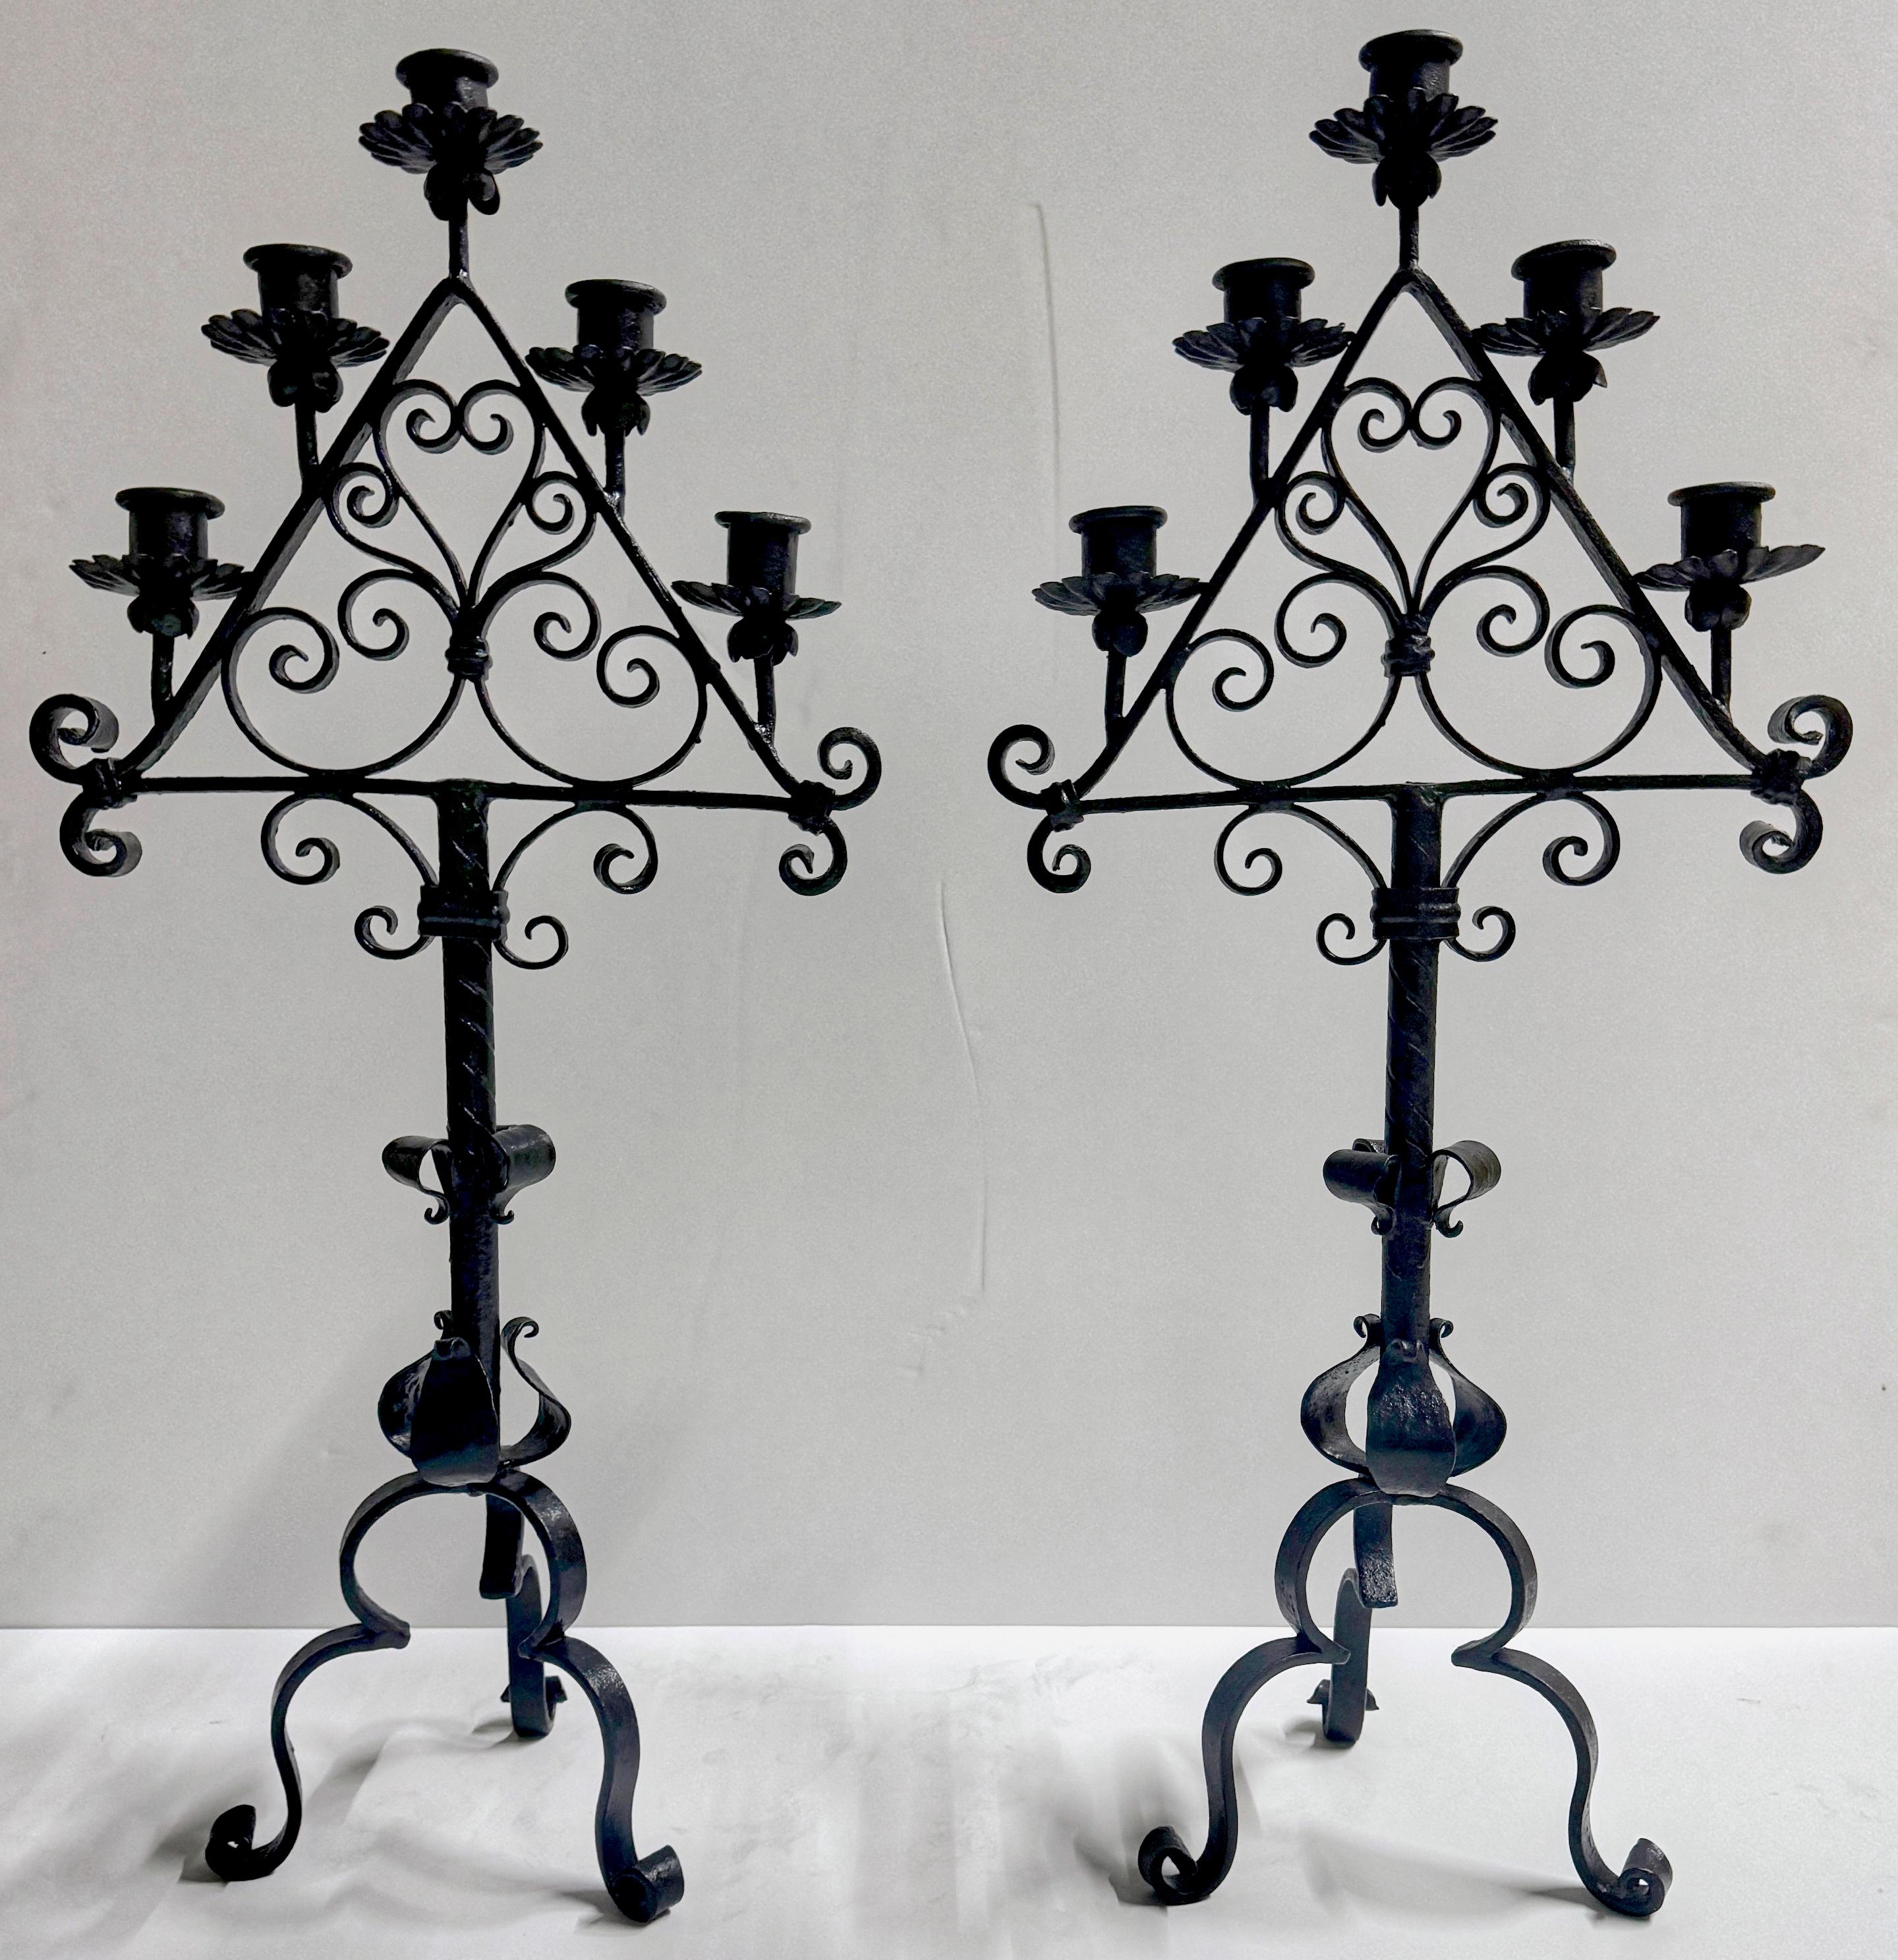 Pair Spanish Colonial Style Forged Iron Candelabra, Atrib. to Addison Mizner 
USA, Circa 1930s
Attributed to Addison Mizner (1872 -1933) 
Provenance: Palm Beach Estate

Illuminate your interior with the timeless elegance of these exquisite Spanish